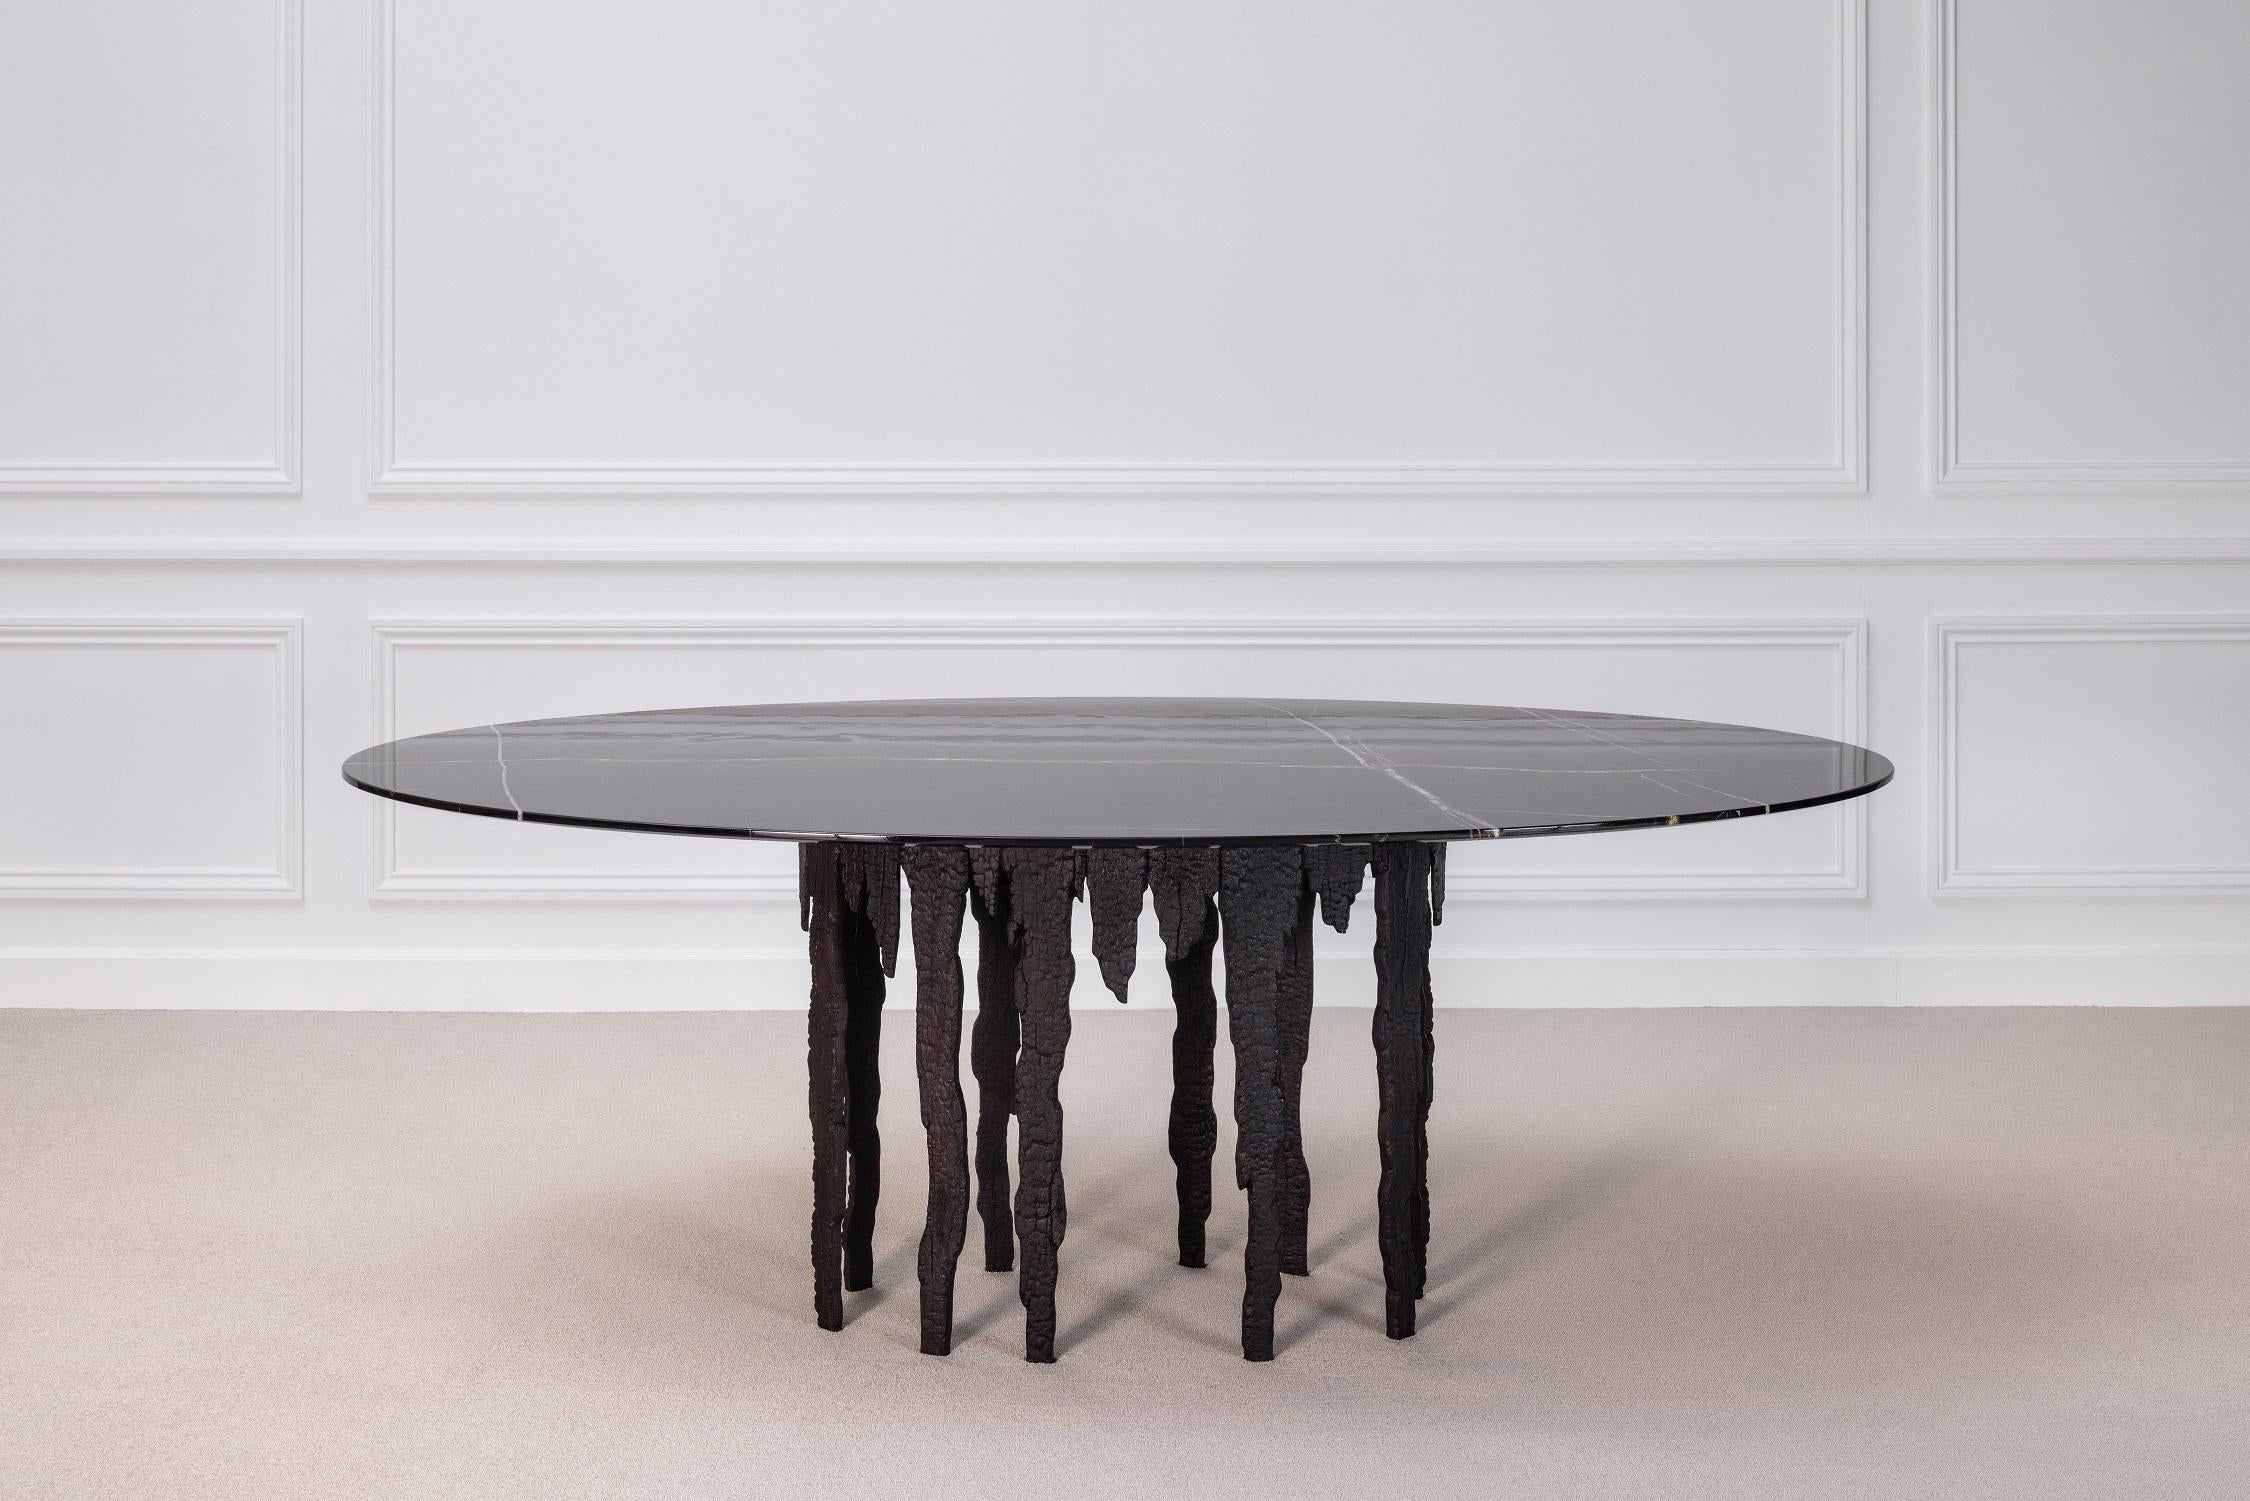 From his Empreinte Collection, a series of pieces centered around a theme of destruction and reconstruction, this exceptional table is composed of patinated bronze cast from broken and burned wooden planks. Crowned with a lush polished black Sahara